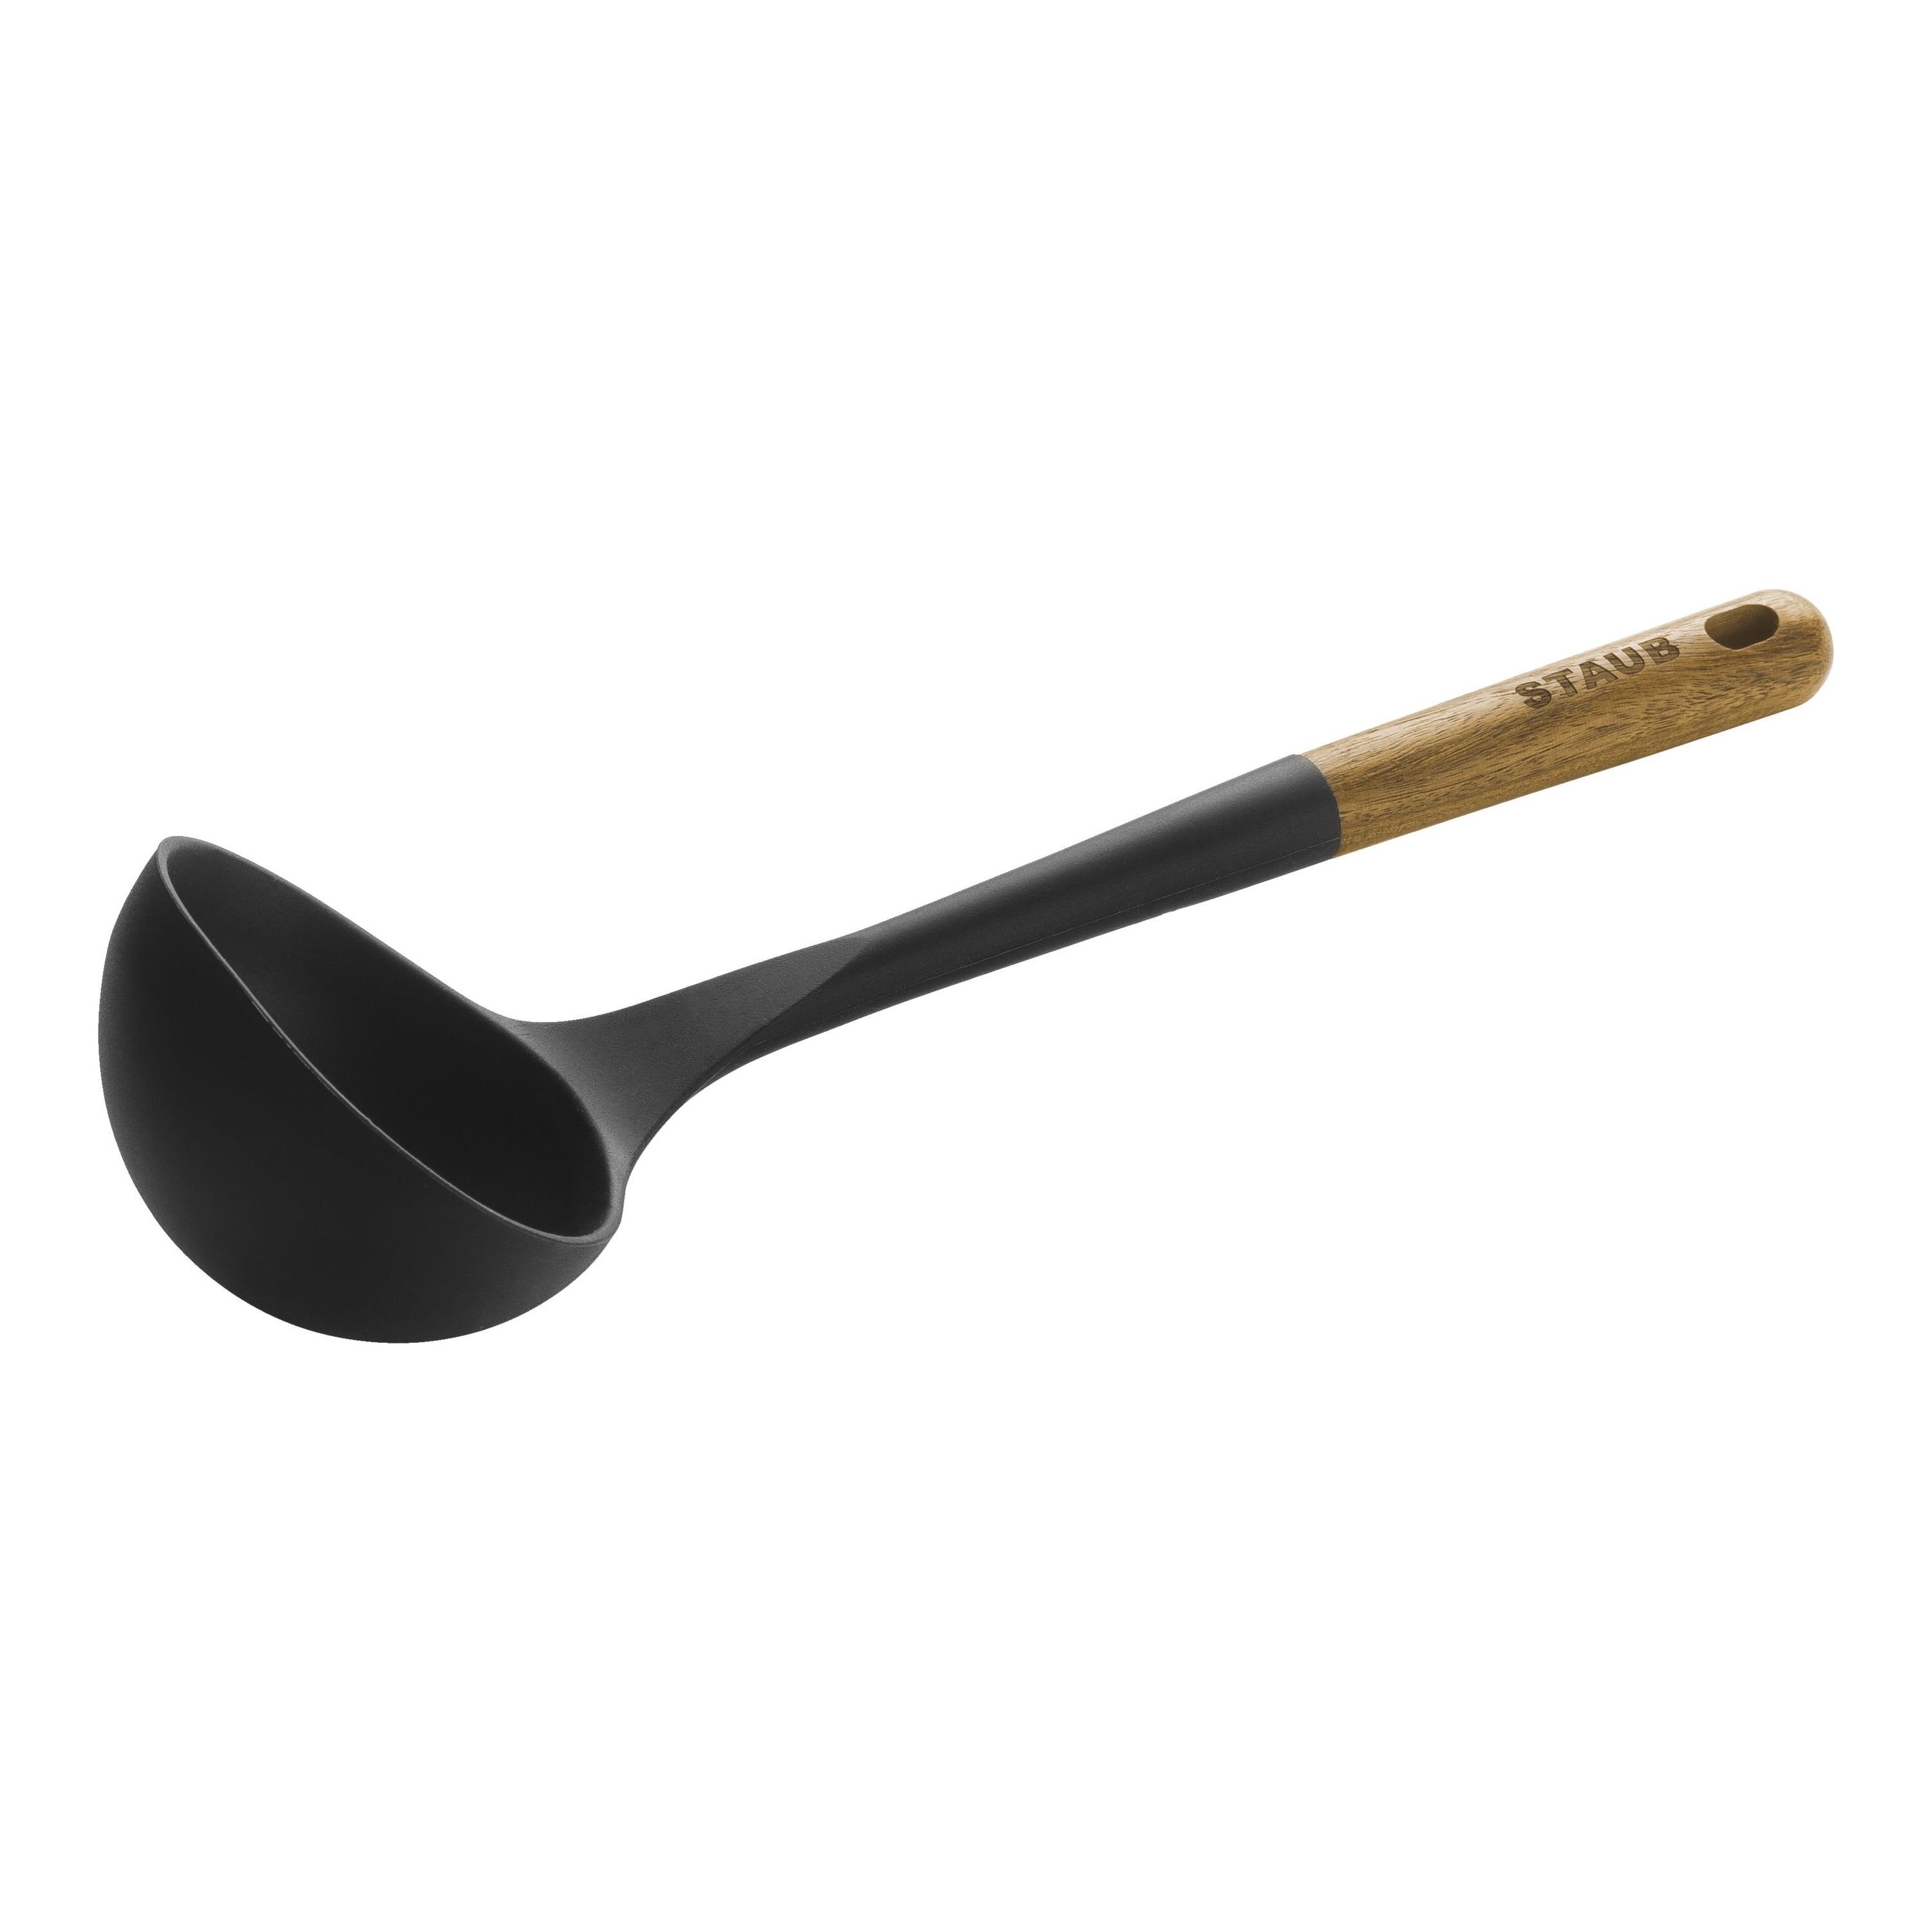 Color : Gold Ladle Spoon Gold Stainless Steel Ladle Long Handle Spoon Large Spoon Durable Kitchenware -11.4 Inches Cooking Utensil Soup Ladle 